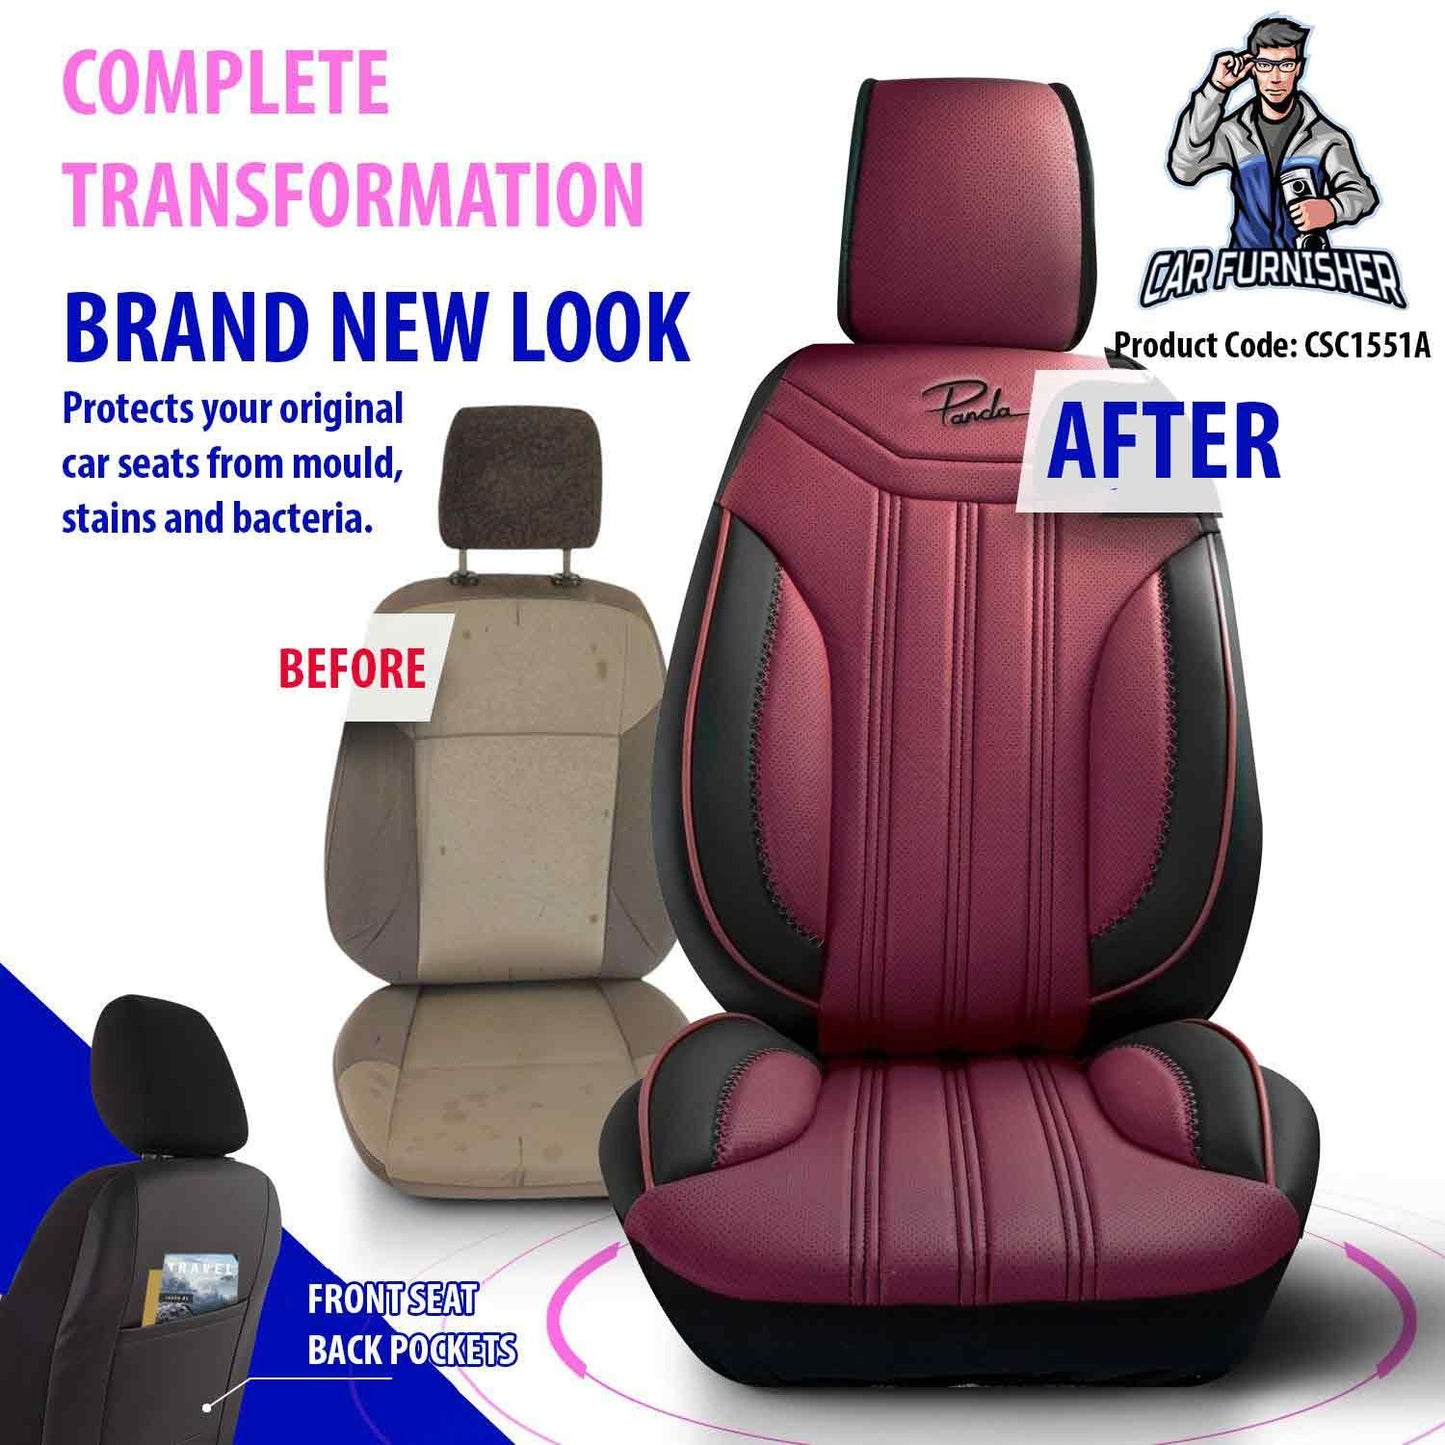 Luxury Car Seat Cover Set (5 Colors) | Miami Series Burgundy Full Leather